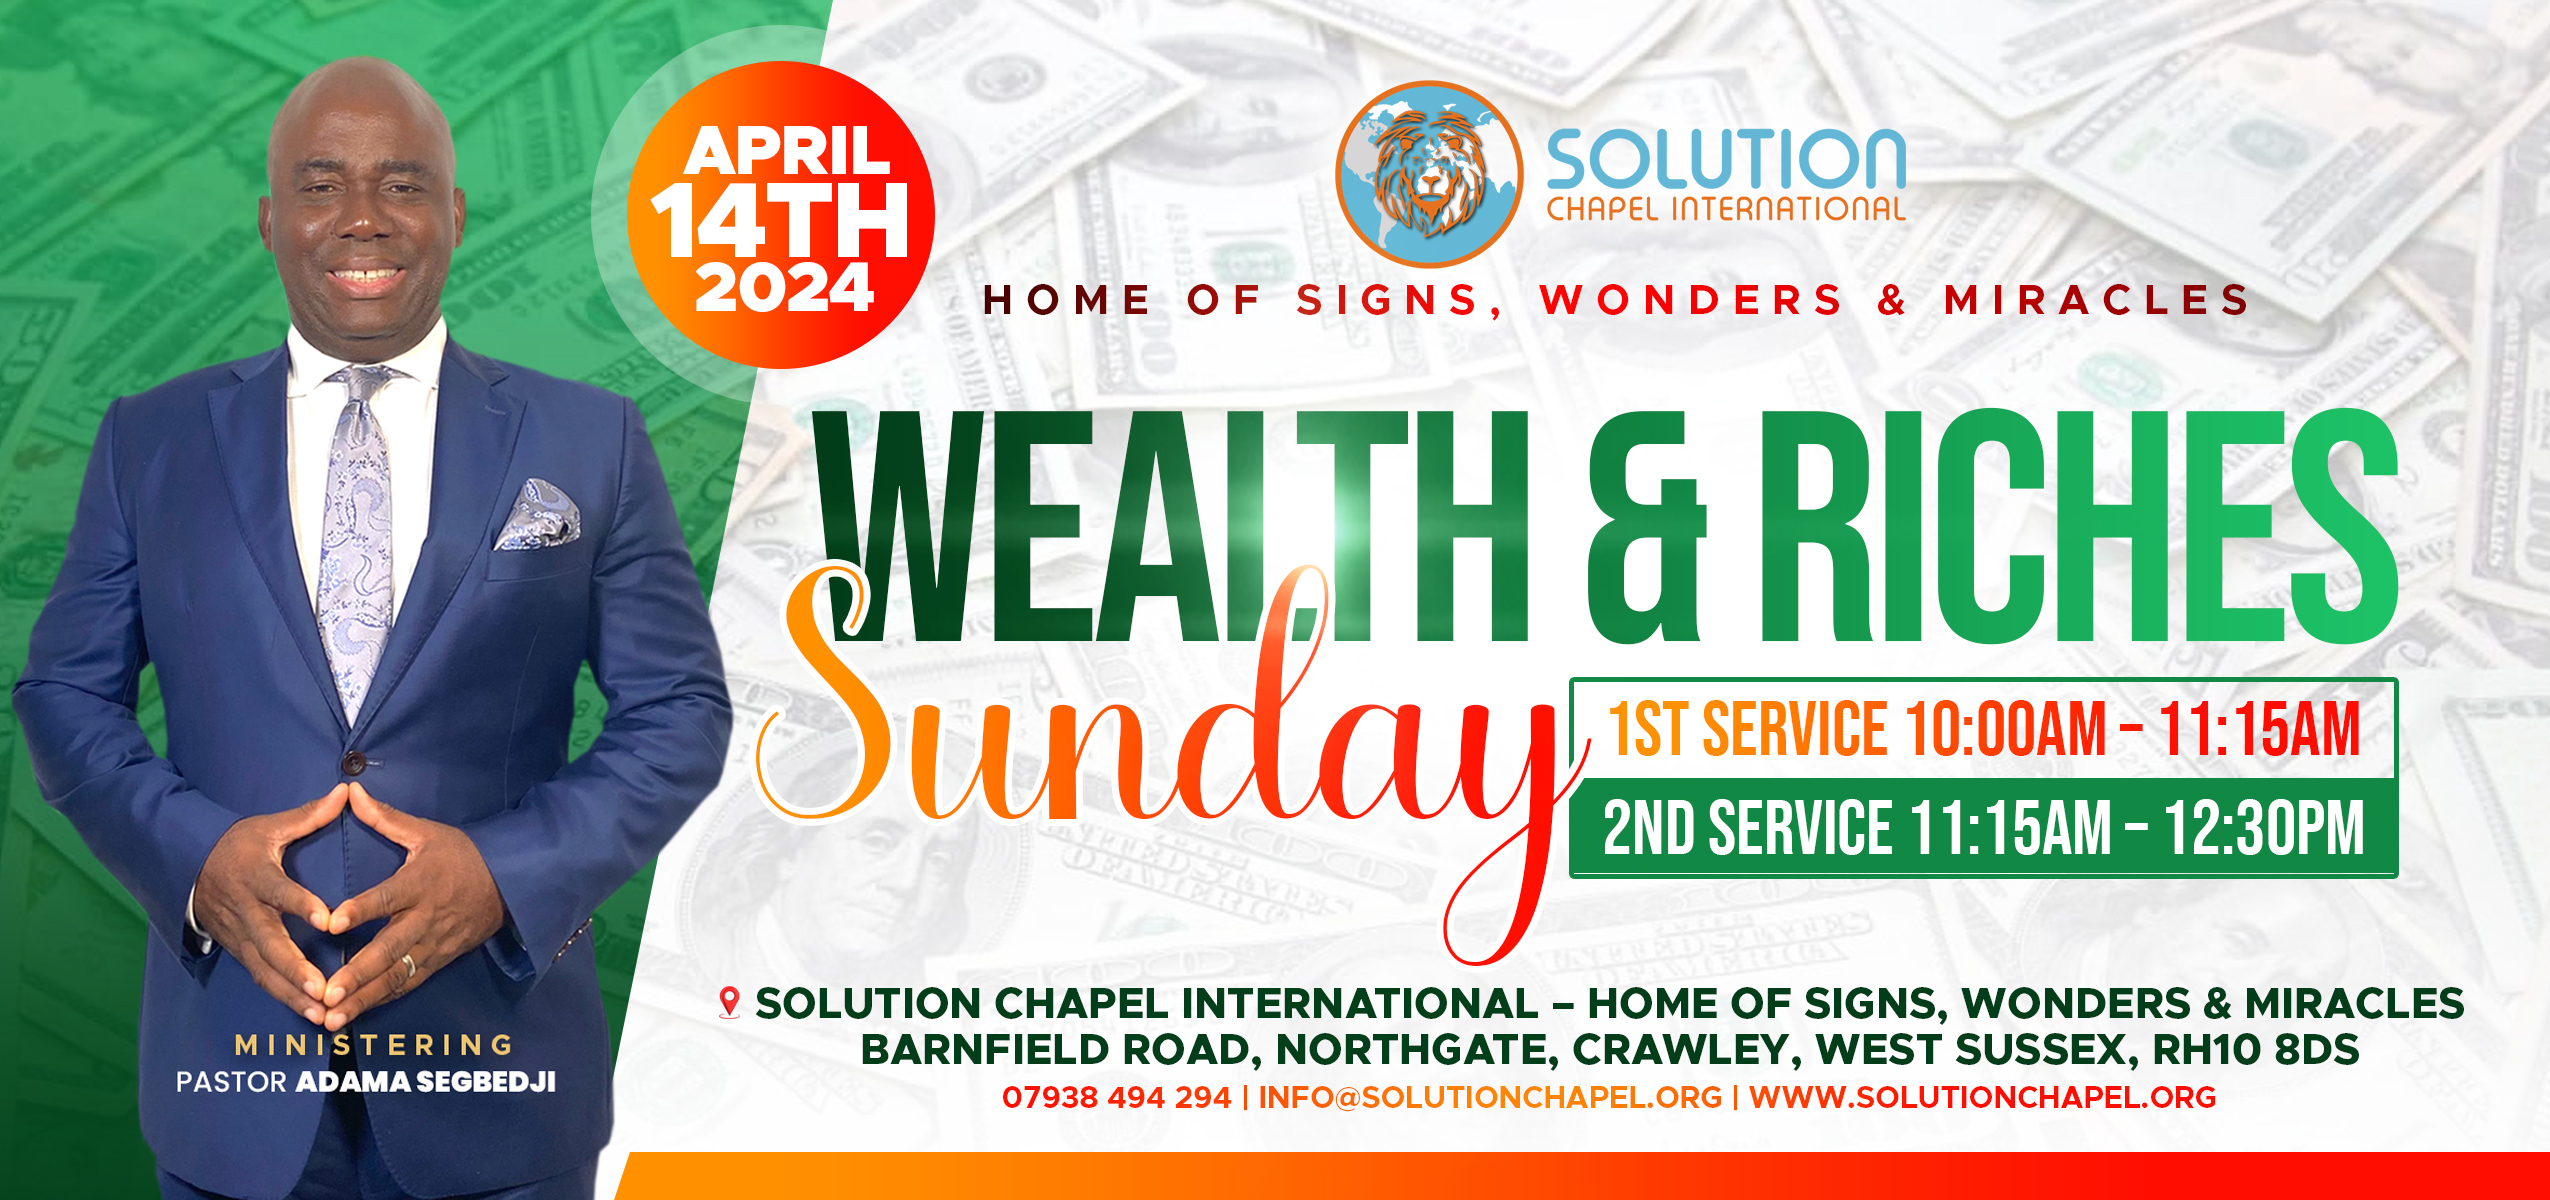 "WEALTH & RICHES SUNDAY"